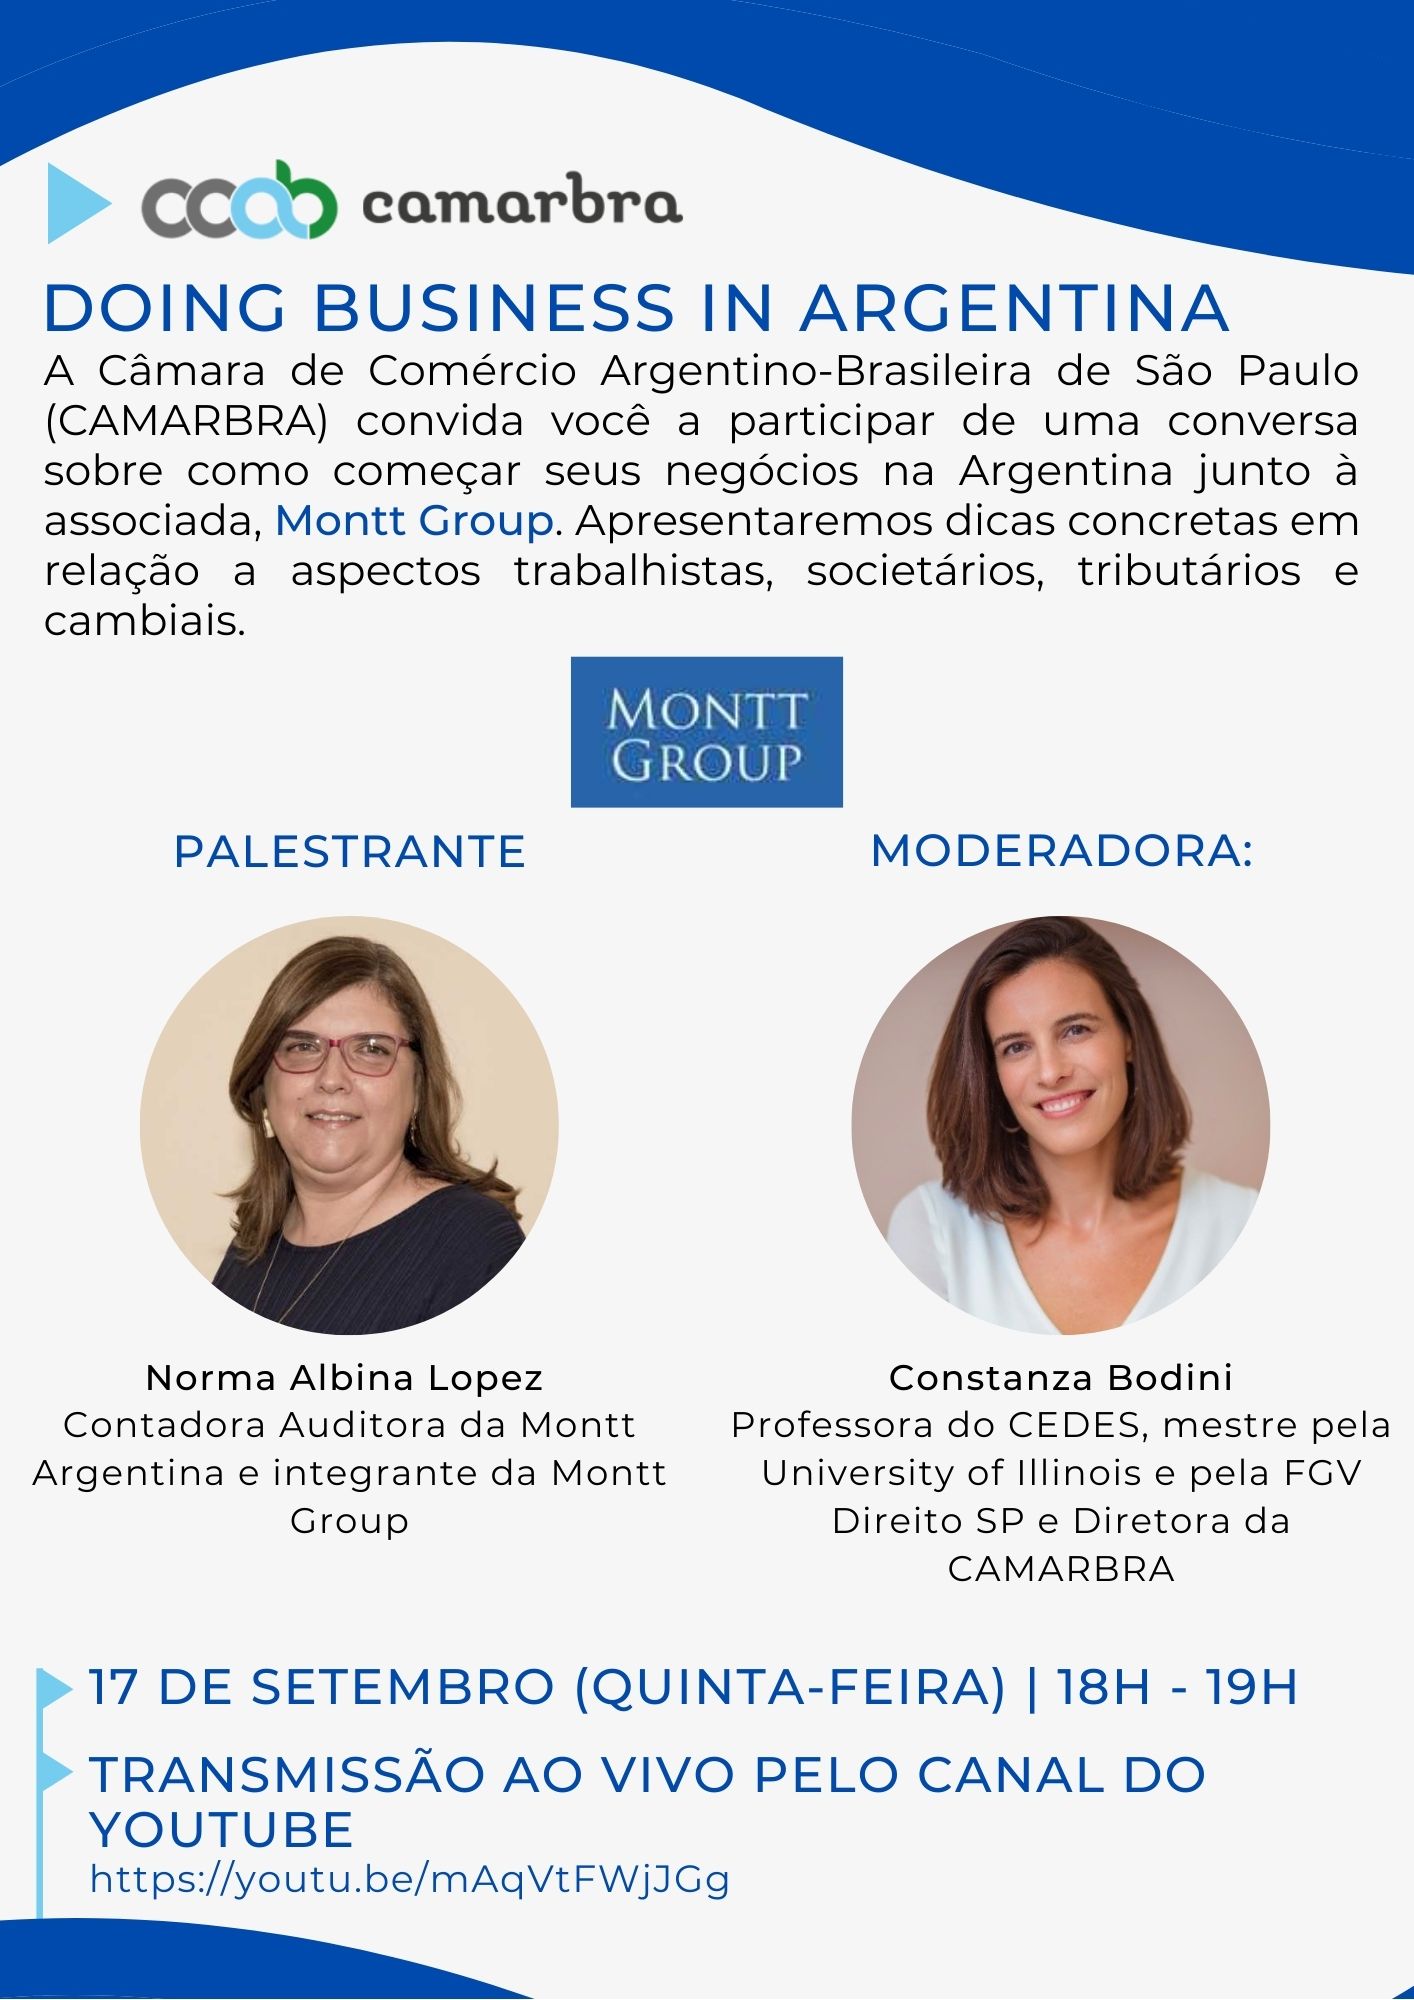 Doing business in Argentina